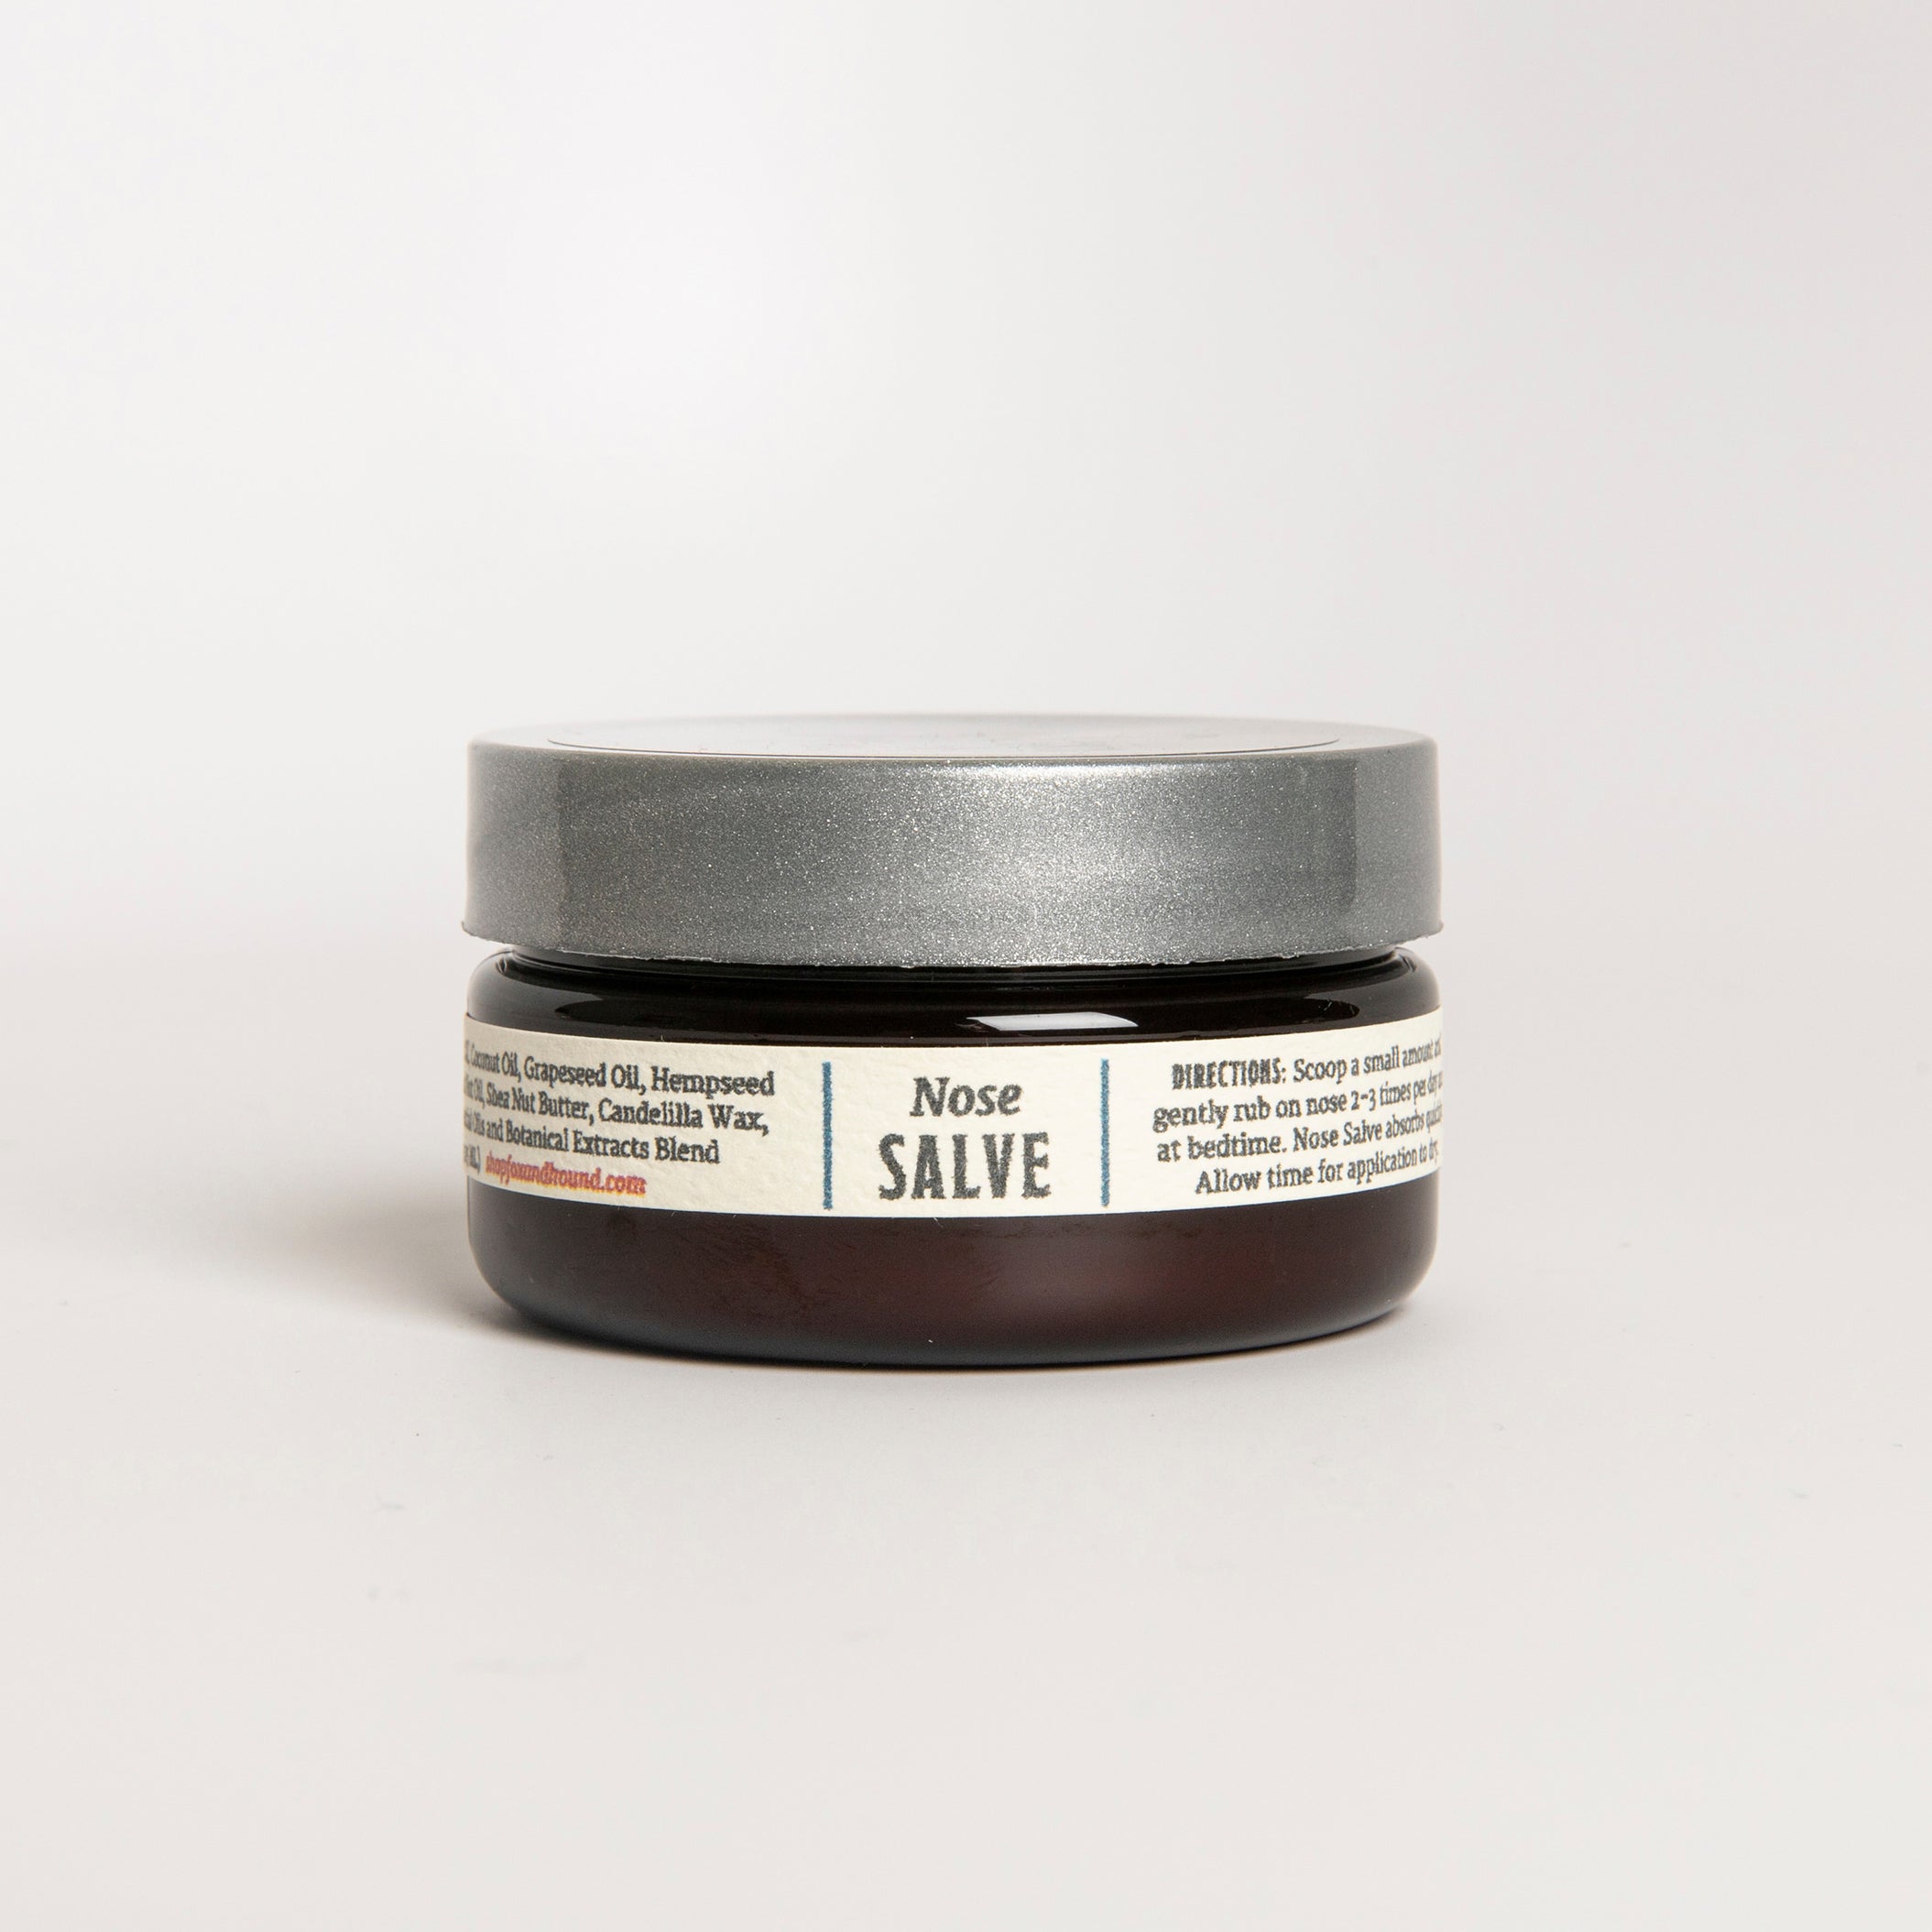 Pet Boutique - Dog Grooming - Bath and Body - Dog Nose Salve by Fox + Hound